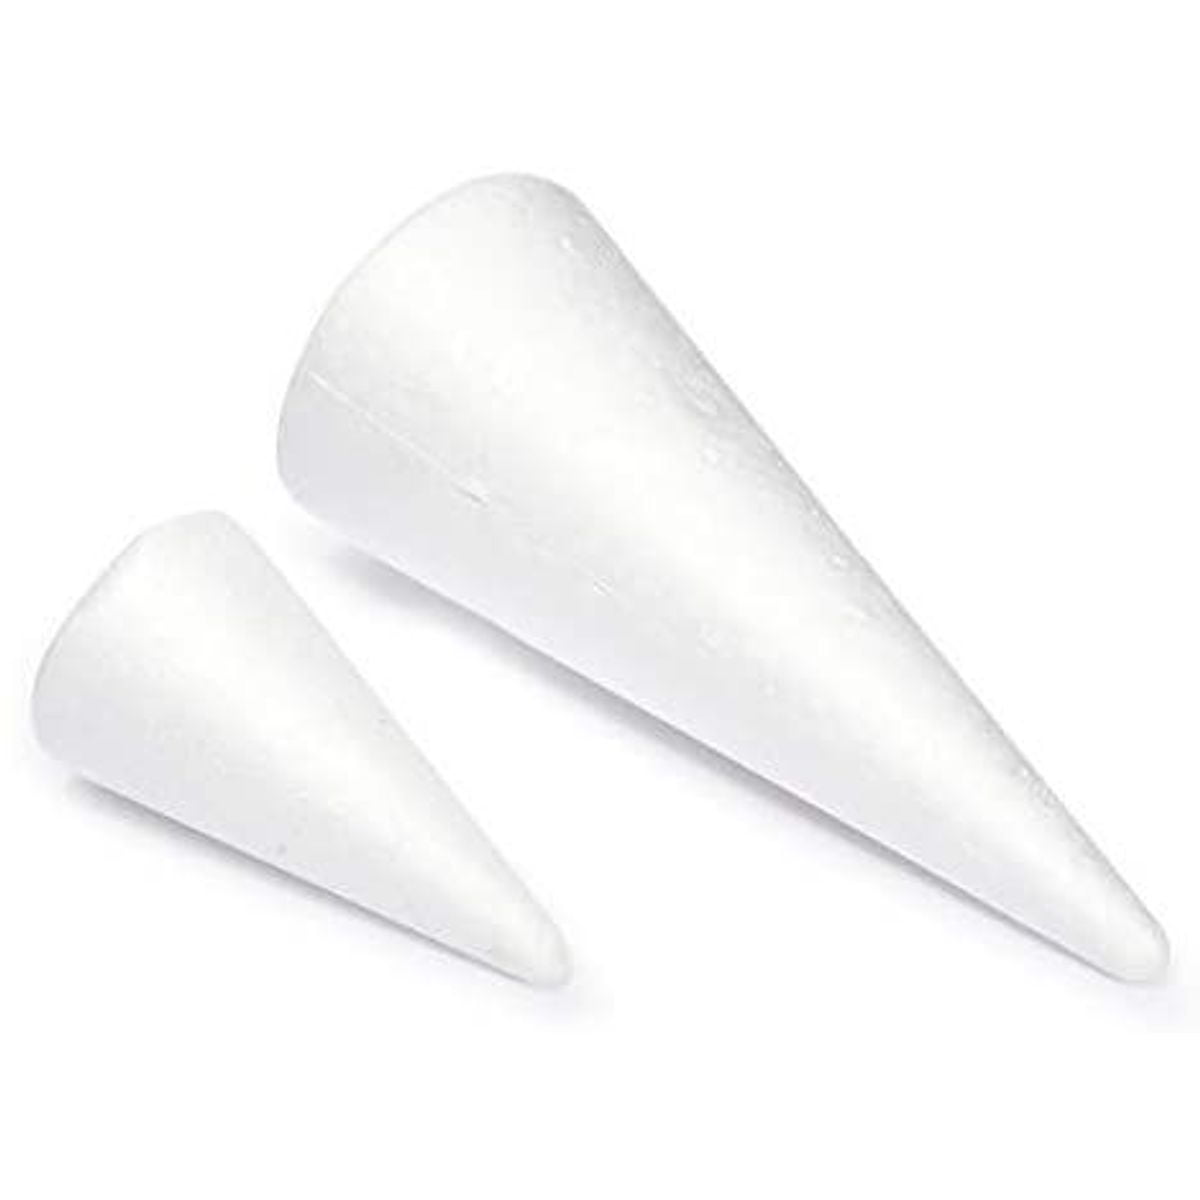 White Foam Cones for Crafts, 4 Assorted Sizes (2.2-6 In, 16 Pack)